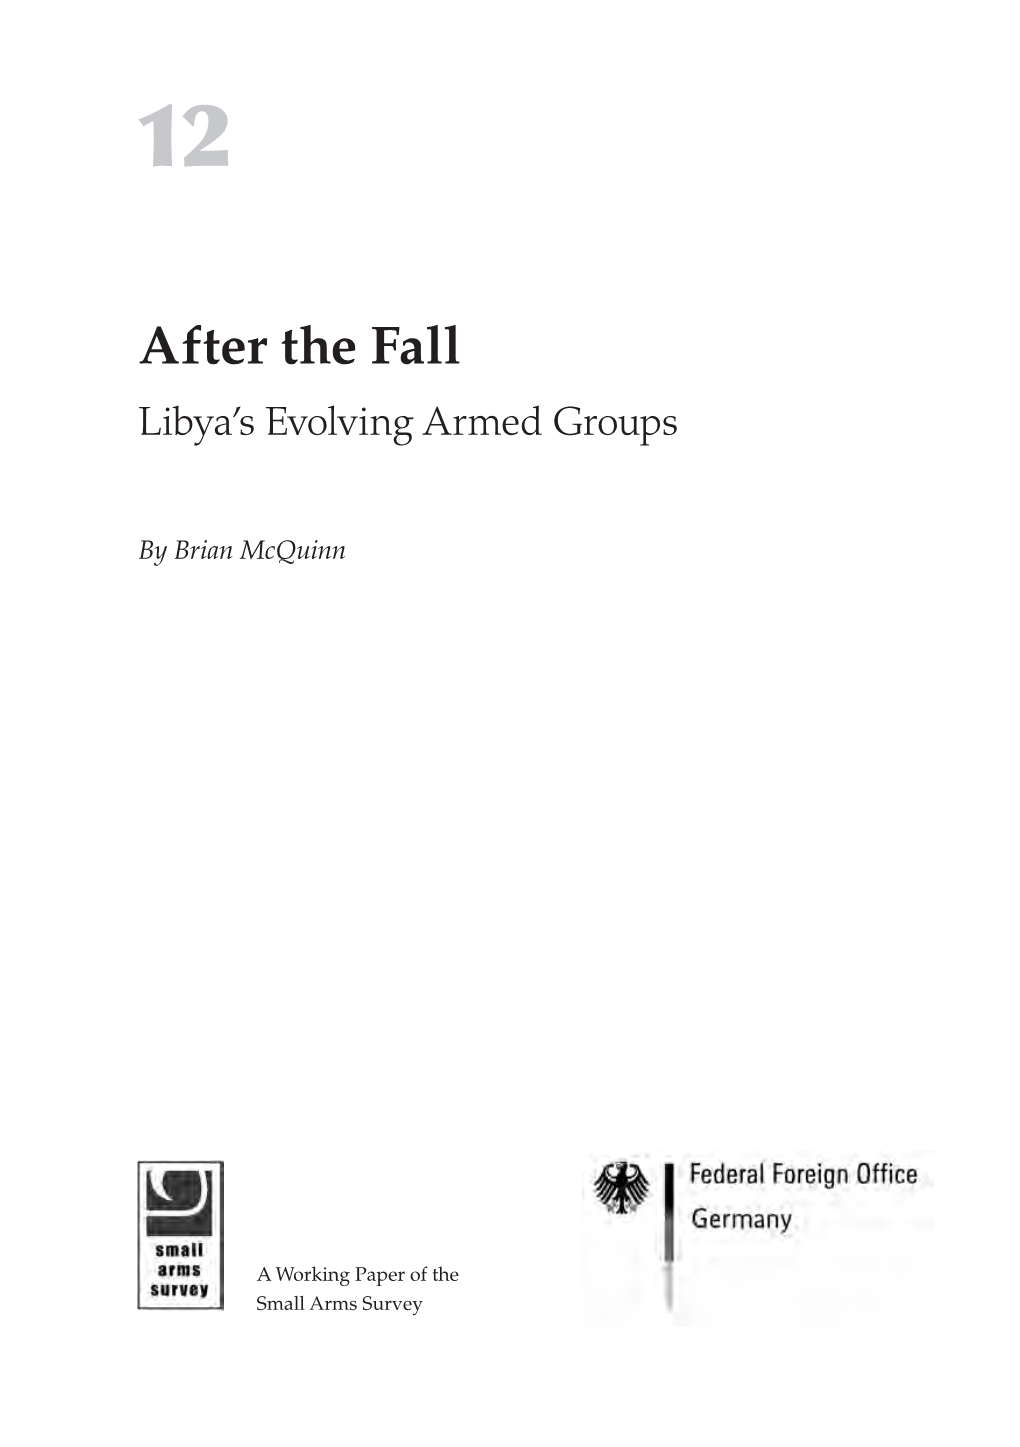 After the Fall: Libya's Evolving Armed Groups